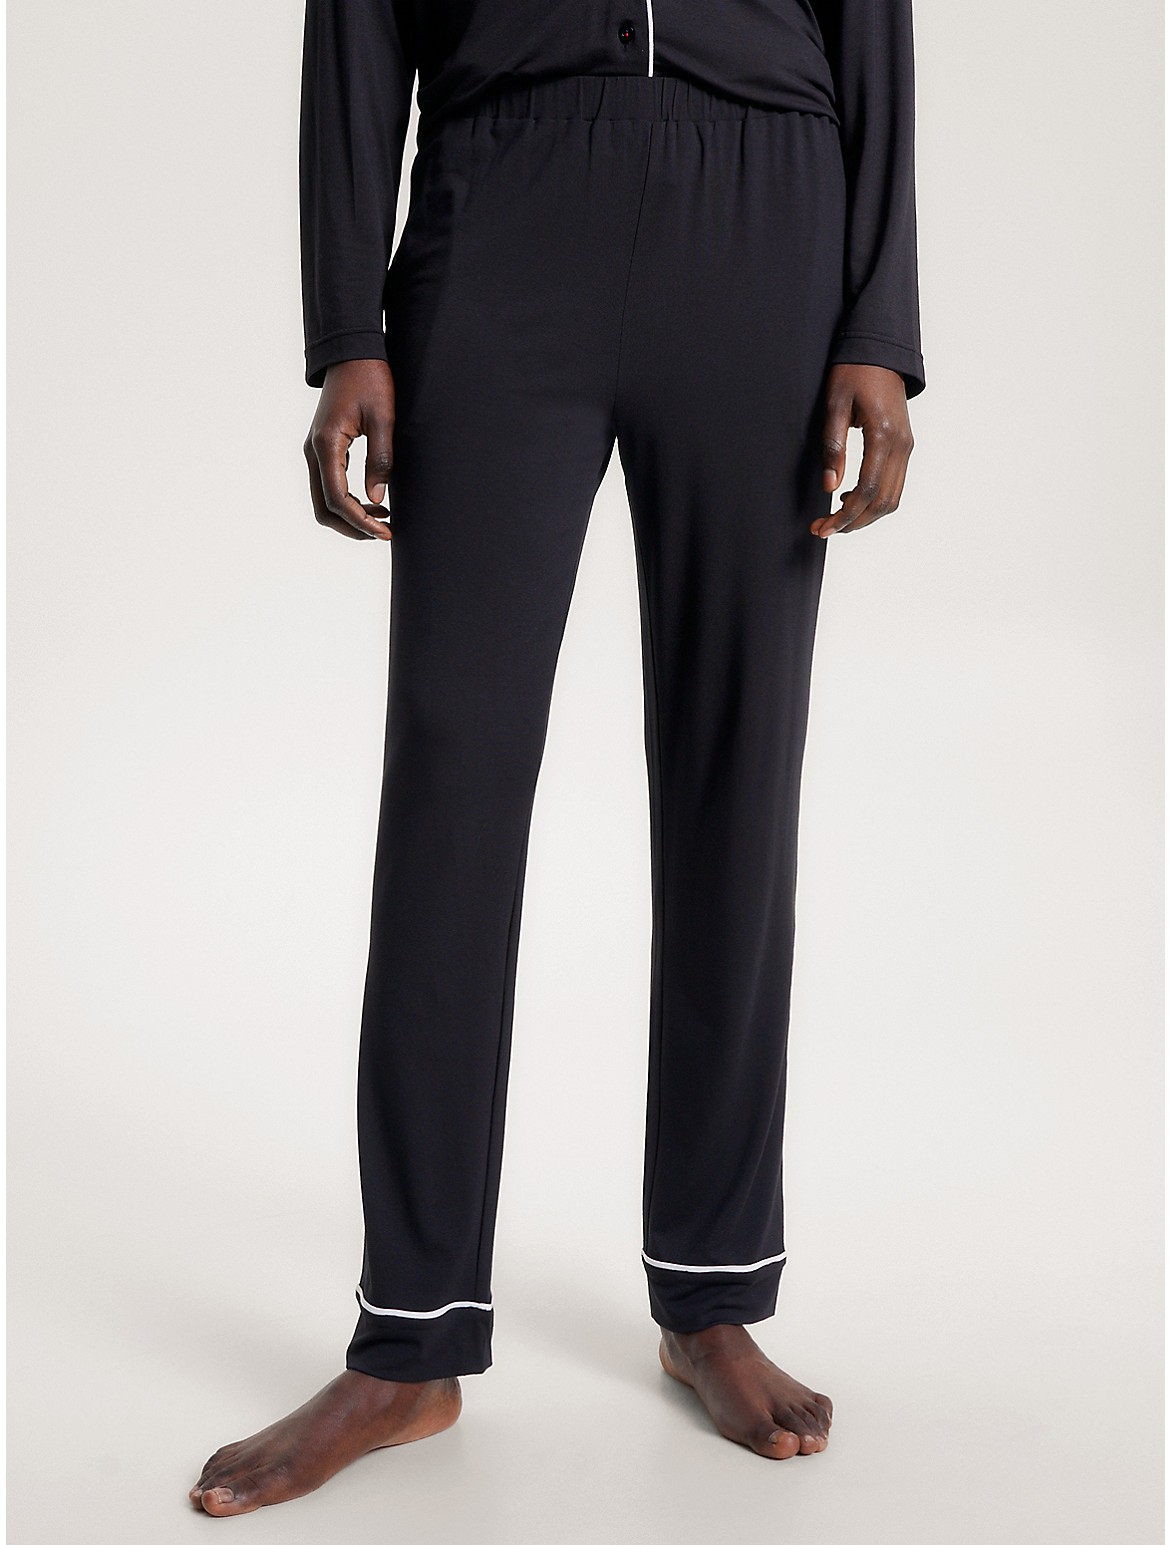 Tommy Hilfiger Piped Trim Pajama Pant In Black